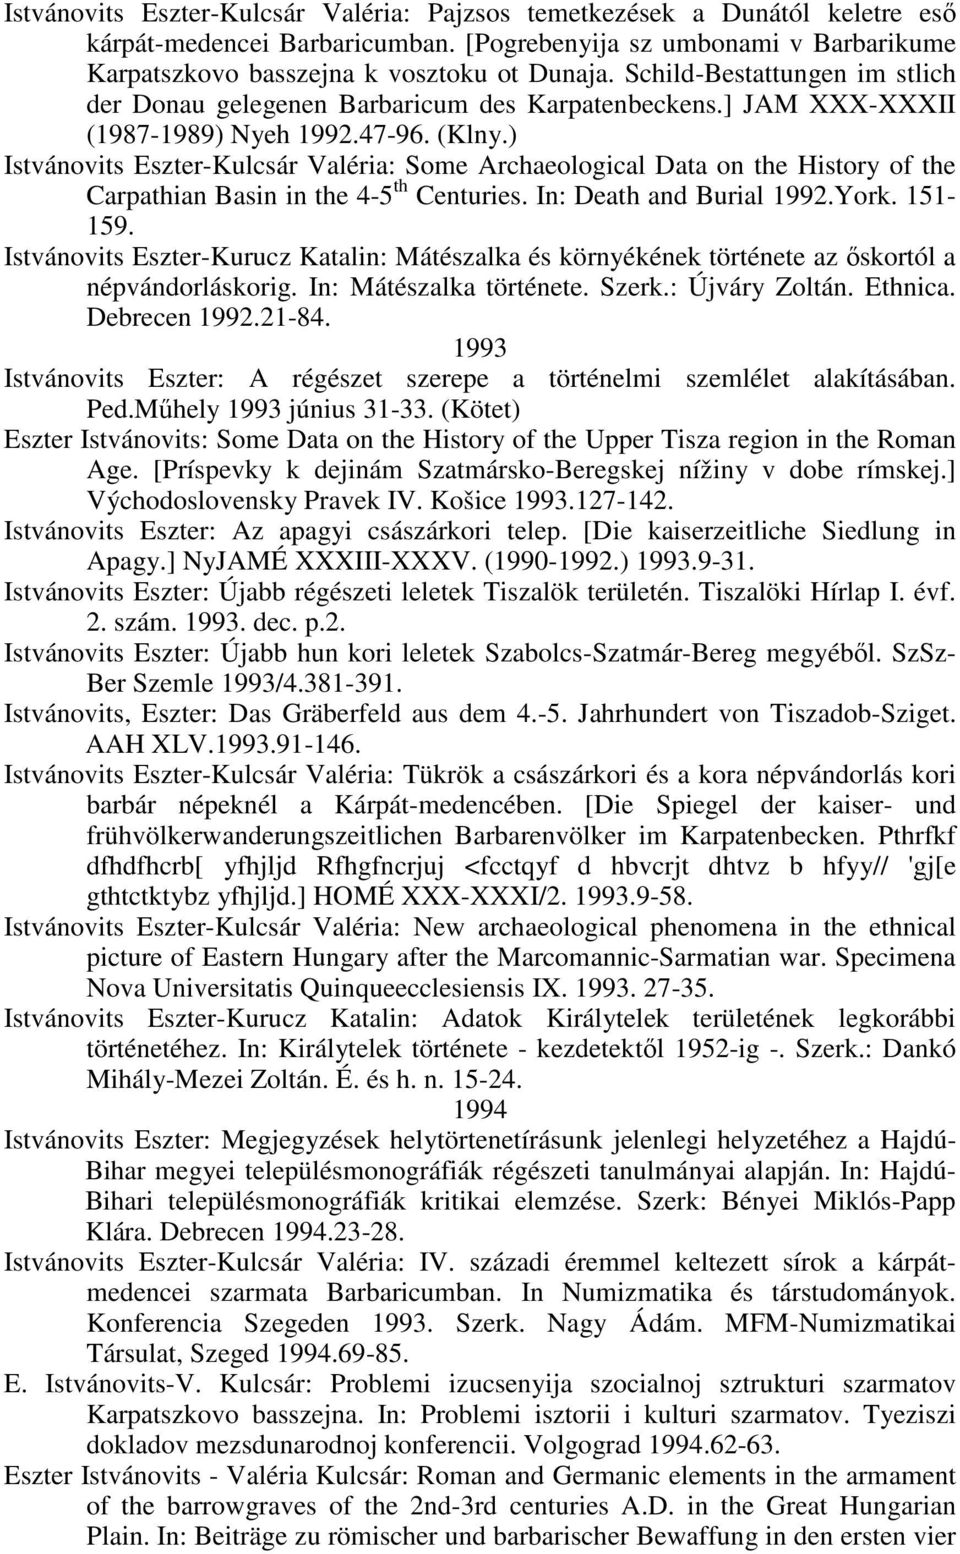 ) Istvánovits Eszter-Kulcsár Valéria: Some Archaeological Data on the History of the Carpathian Basin in the 4-5 th Centuries. In: Death and Burial 1992.York. 151-159.